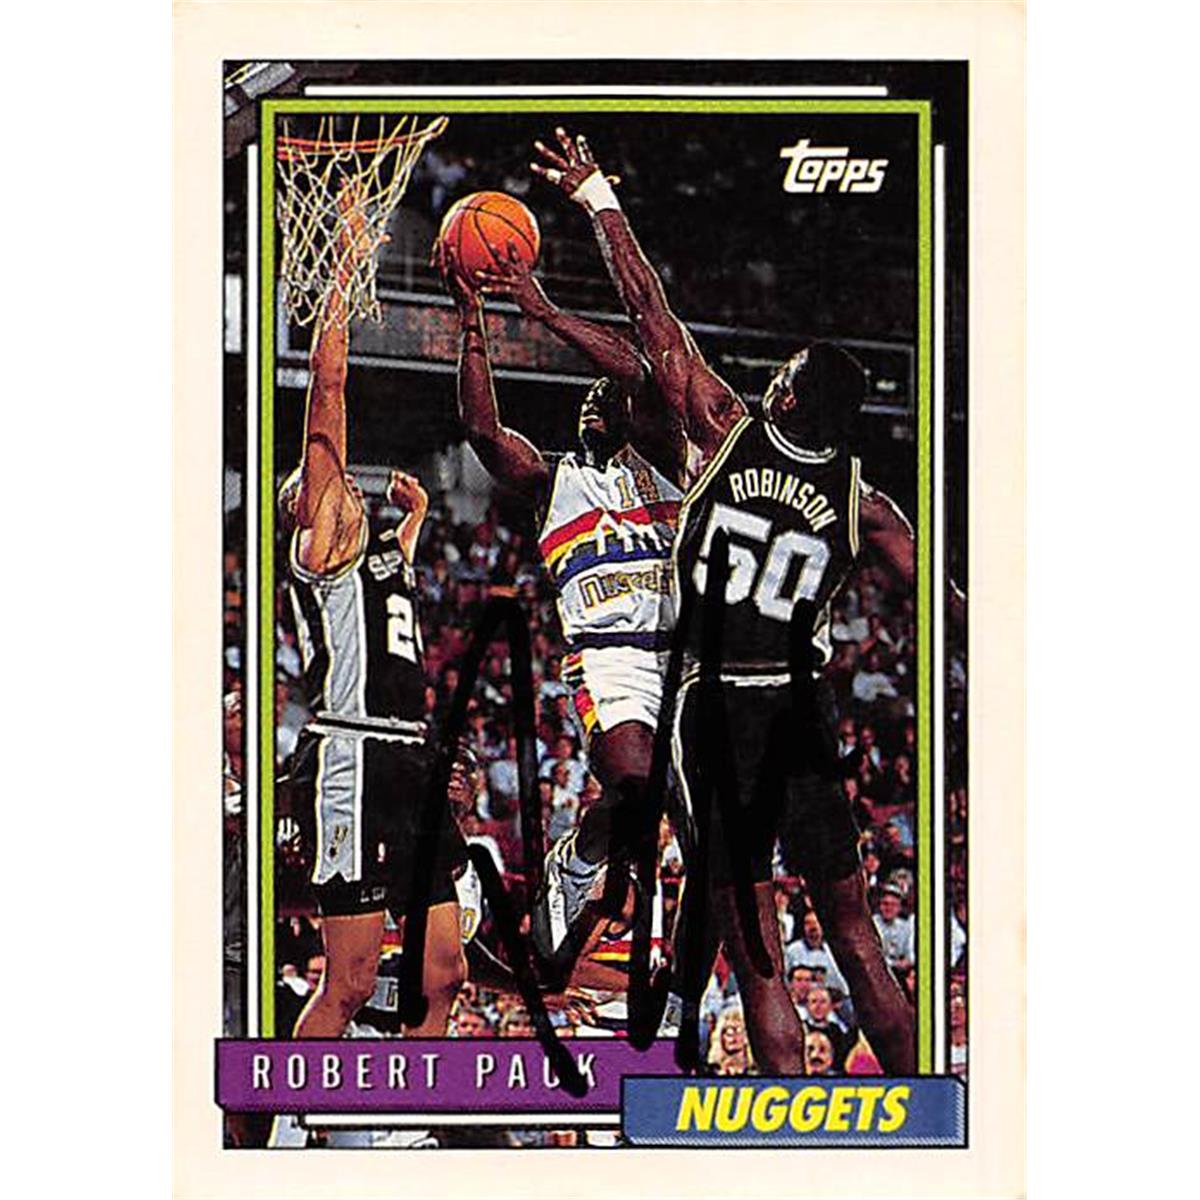 Picture of Autograph Warehouse 388482 Robert Pack Autographed Basketball Card - Denver Nuggets 1993 Topps No.366